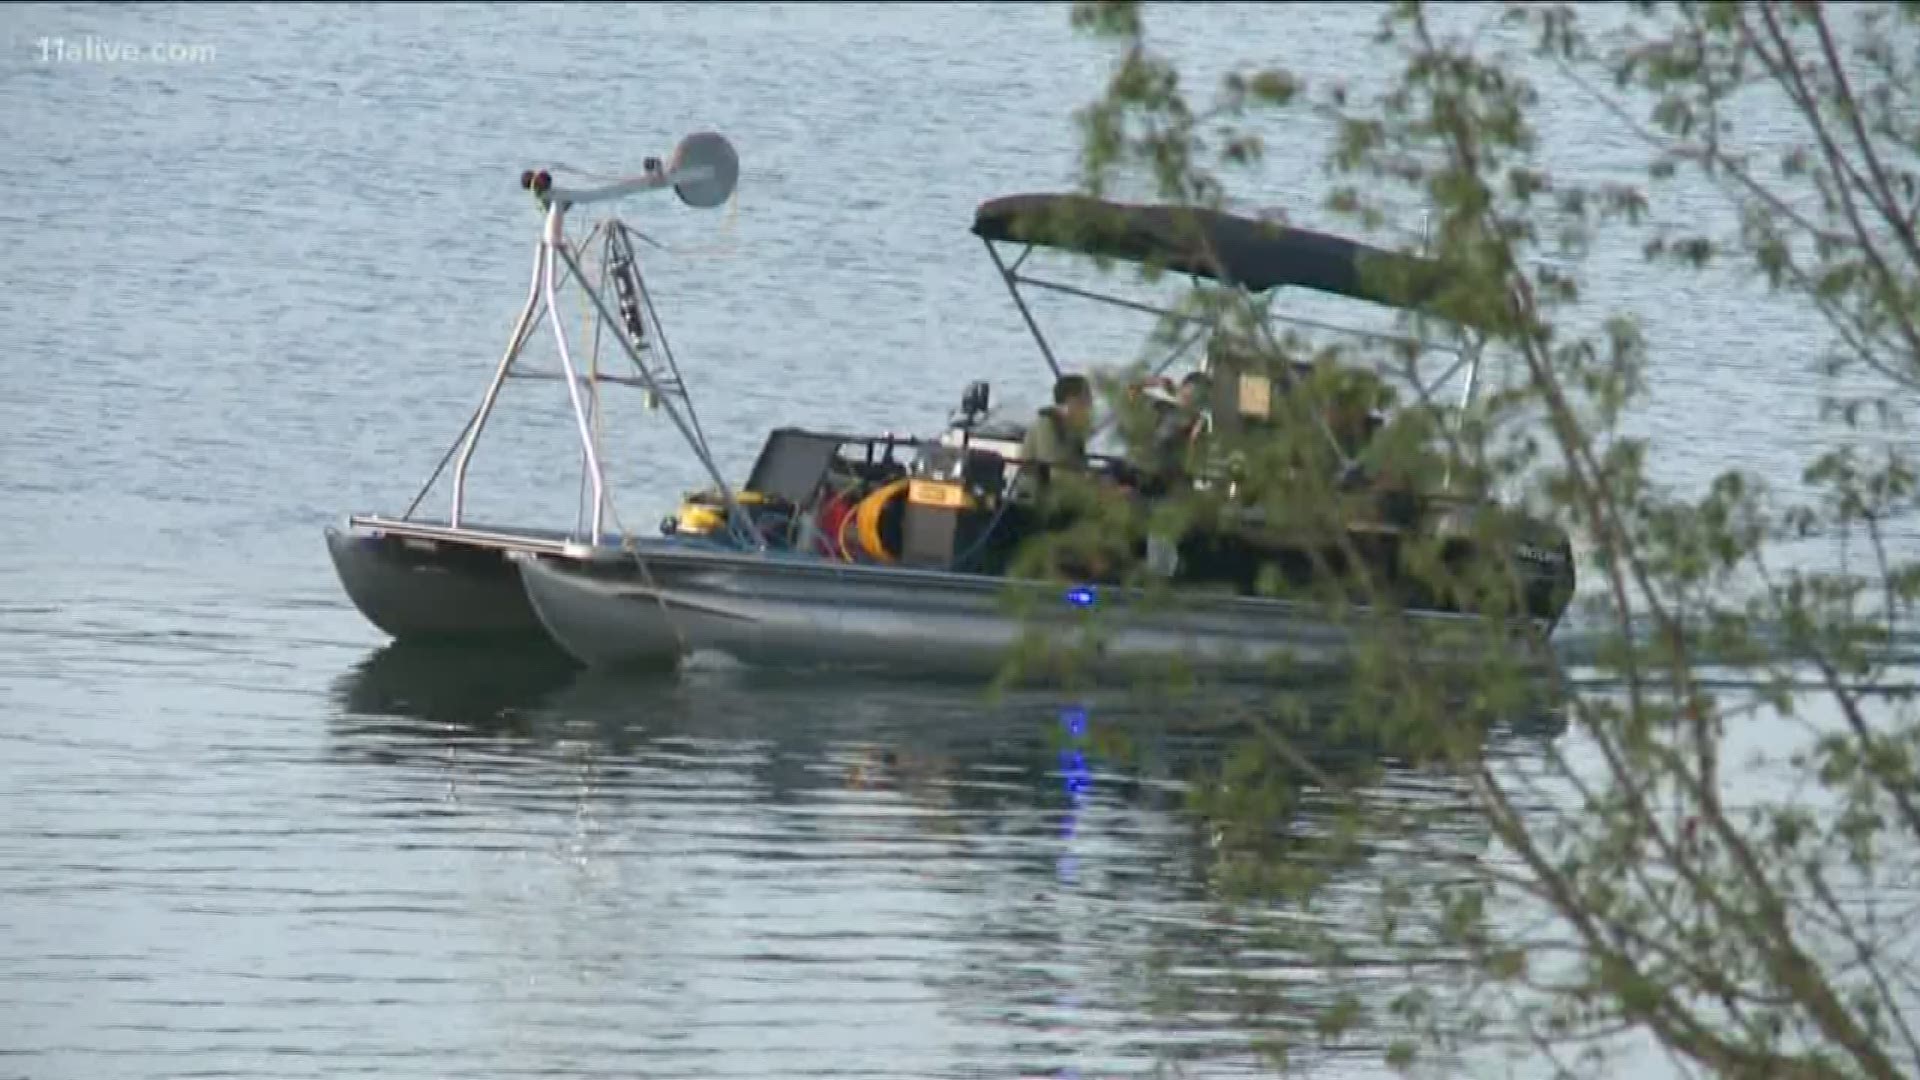 DNR crews were on the lake early Sunday morning, continuing efforts to recover the body of 18-year-old Corey Brown. He drowned on the lake Friday evening, officials said.